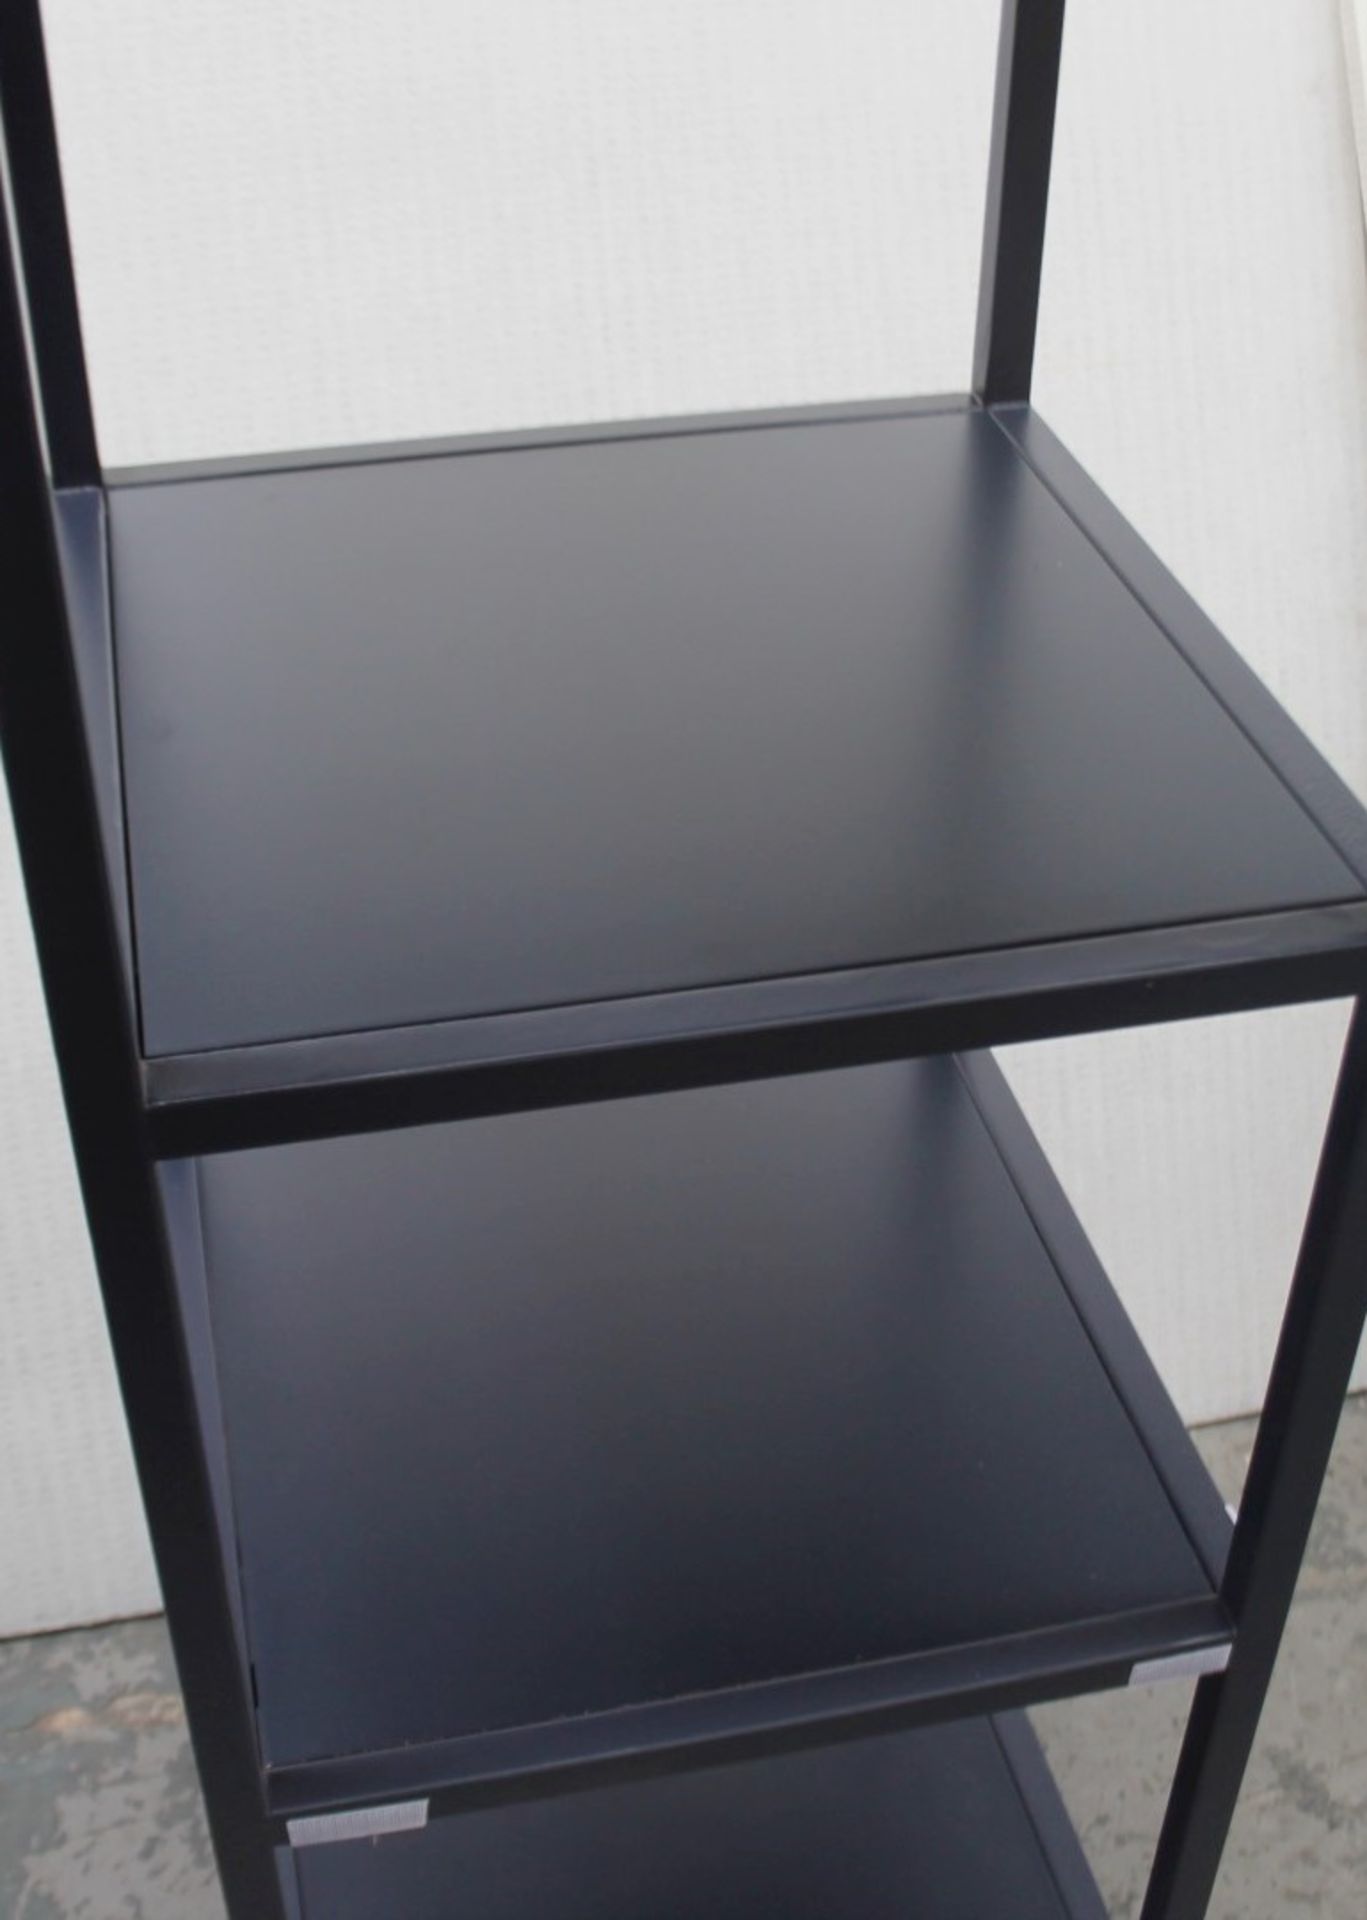 1 x Tall 2.1-Metre Tall 5-Tier Display Unit In Navy Blue Featurnig A Sturdy Metal Frame - Ex-Display - Image 3 of 4